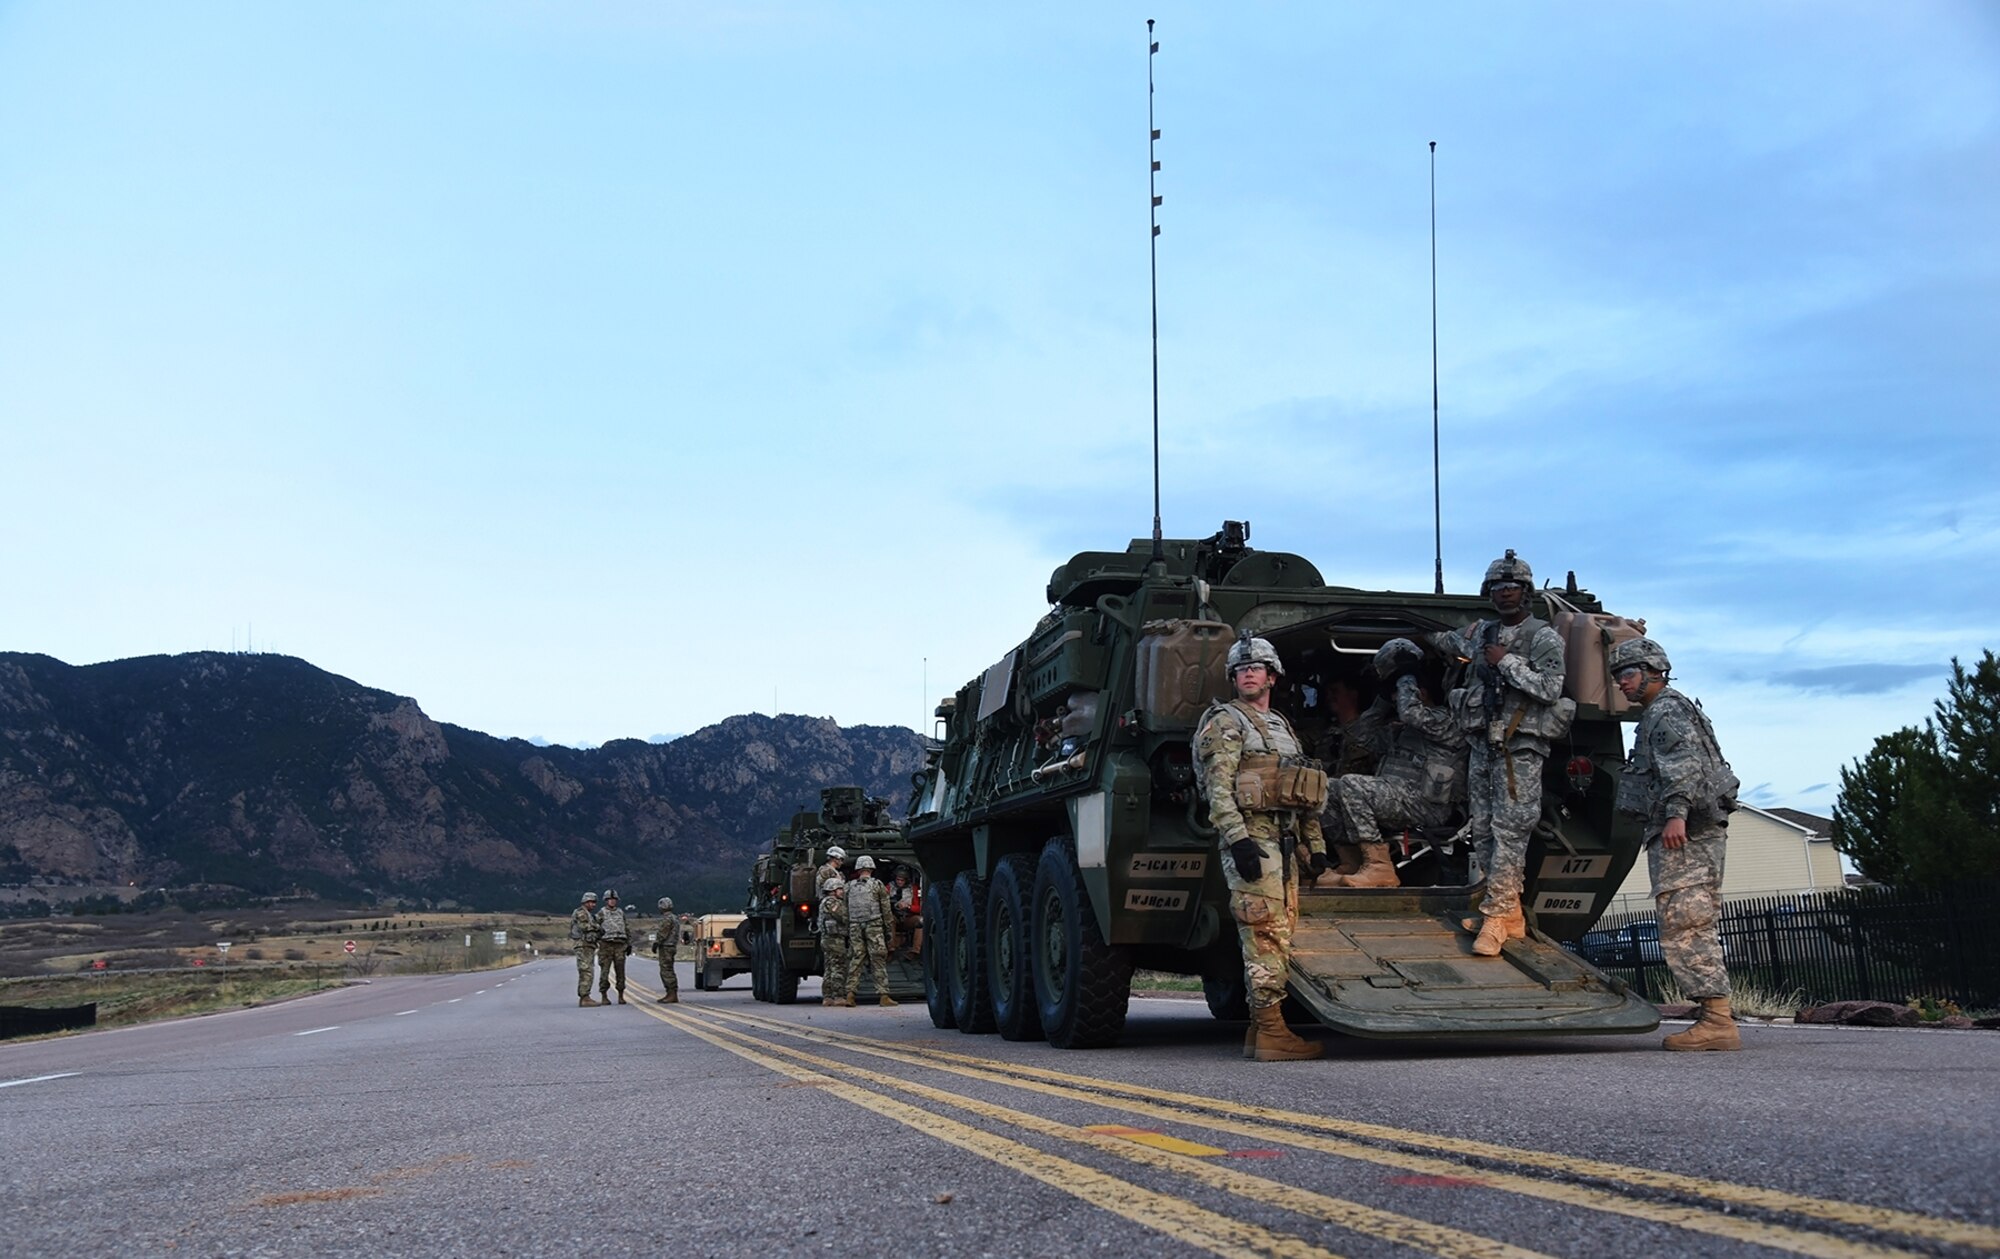 Soldiers and Stryker vehicles from the 1st Stryker Brigade Combat Team, 4th Infantry Division at Fort Carson, Colo., provided support for the 50th anniversary rededication ceremony at Cheyenne Mountain Air Force Station, Colo., April 15, 2016. Since its inception during the Cold War and throughout the war on terrorism, Cheyenne Mountain has remained critical to the defense mission, providing command and control for the nation since 1966. Cheyenne Mountain AFS is owned by the 21st Space Wing at Peterson Air Force Base, Colo., and operated by the 721st Mission Support Group. (U.S. Air Force photo/Airman 1st Class Dennis Hoffman)